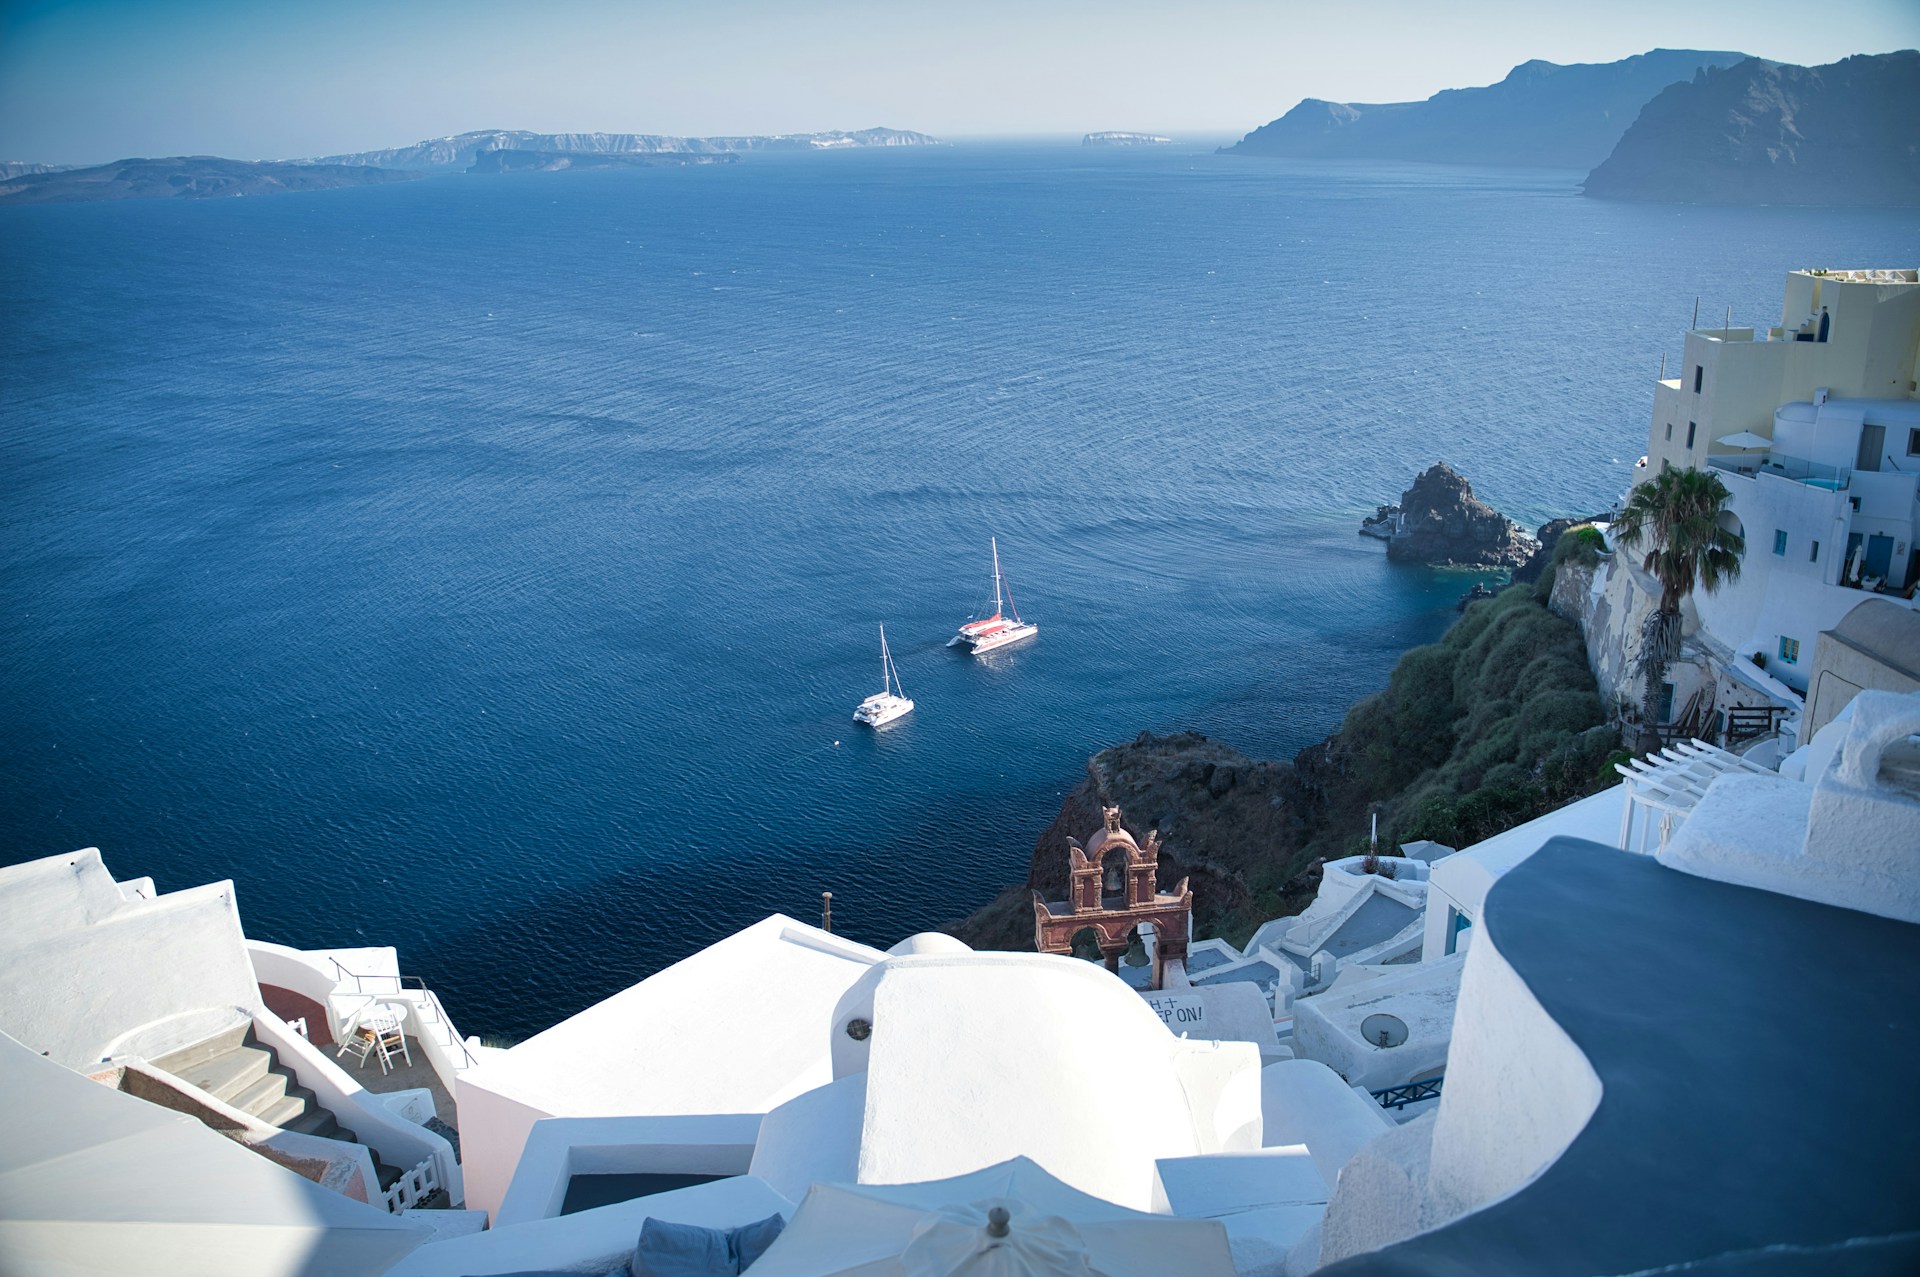 Panoramic views of white-washed buildings perched on the caldera cliffs and the dark-blue Aegean Sea in the background